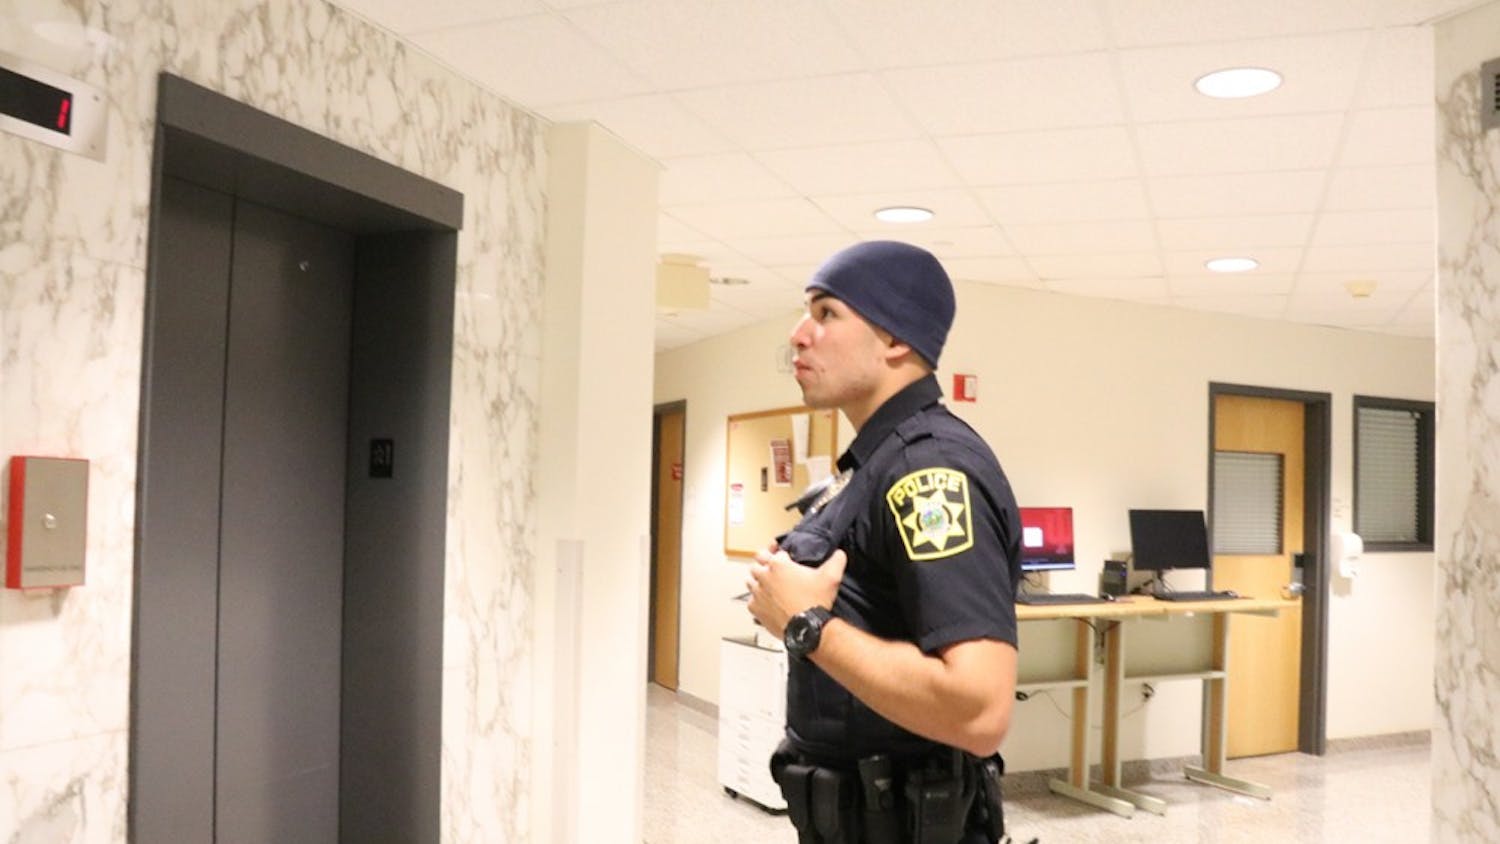 Full-time officer Pablo Padilla awaits an elevator at Willkie Residence Center. One of IUPD's most common calls involves an odor of marijuana. 
